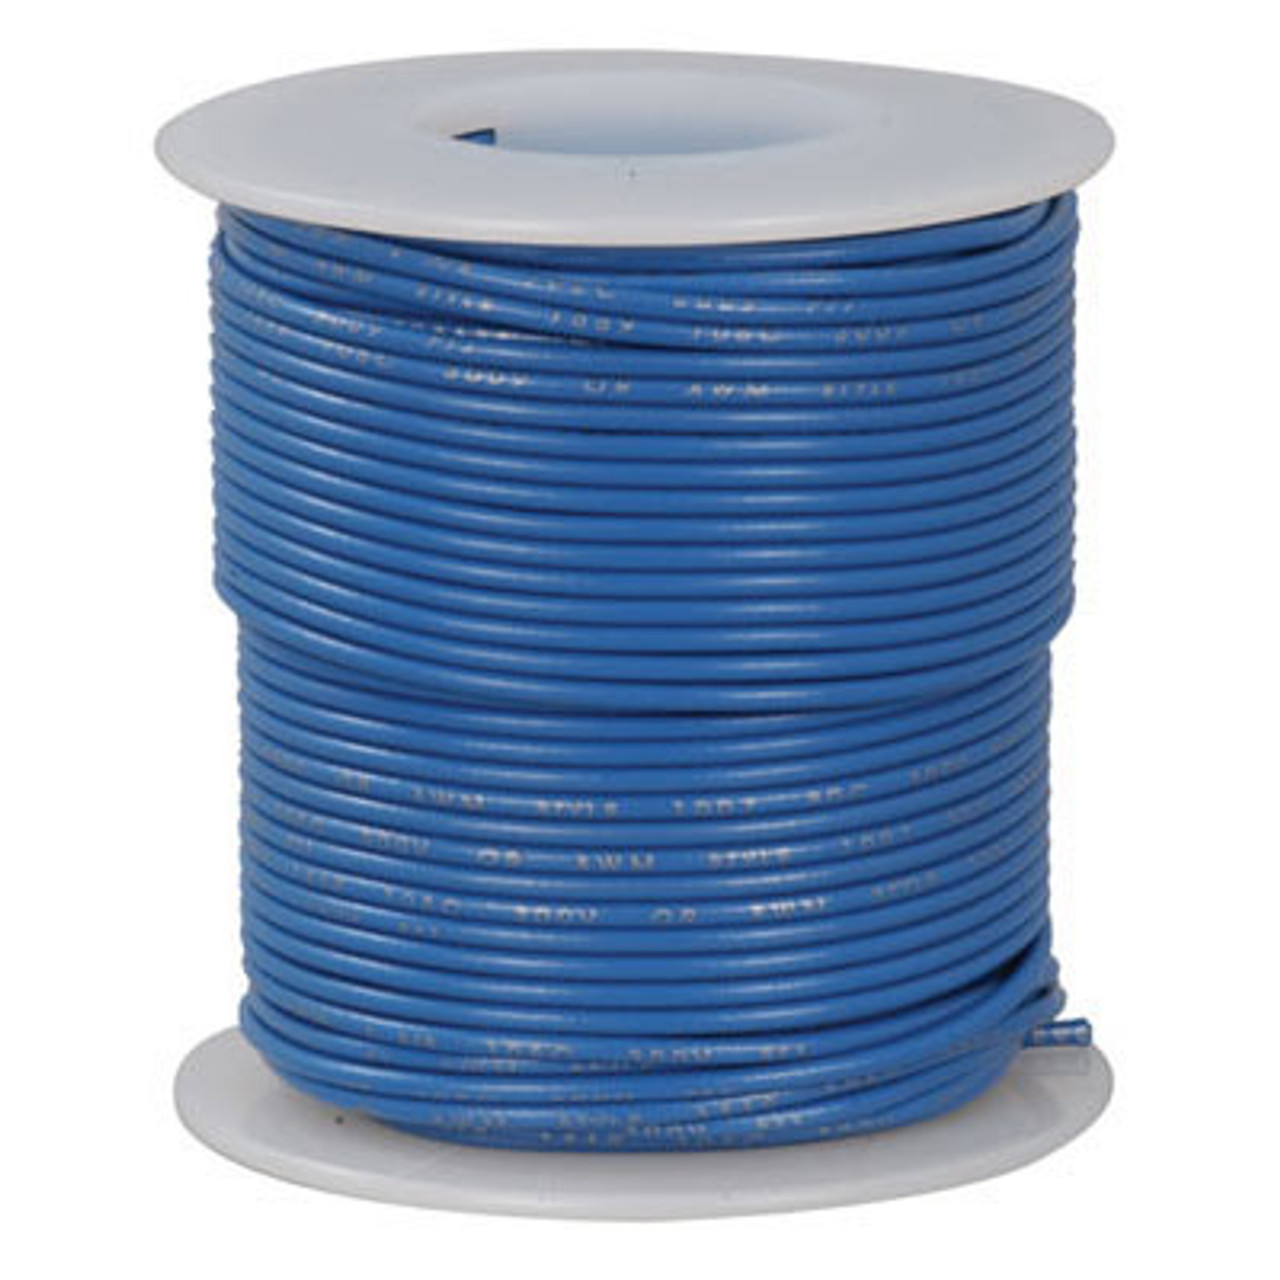 Blue 100 Foot 18 AWG stranded hook-up wire